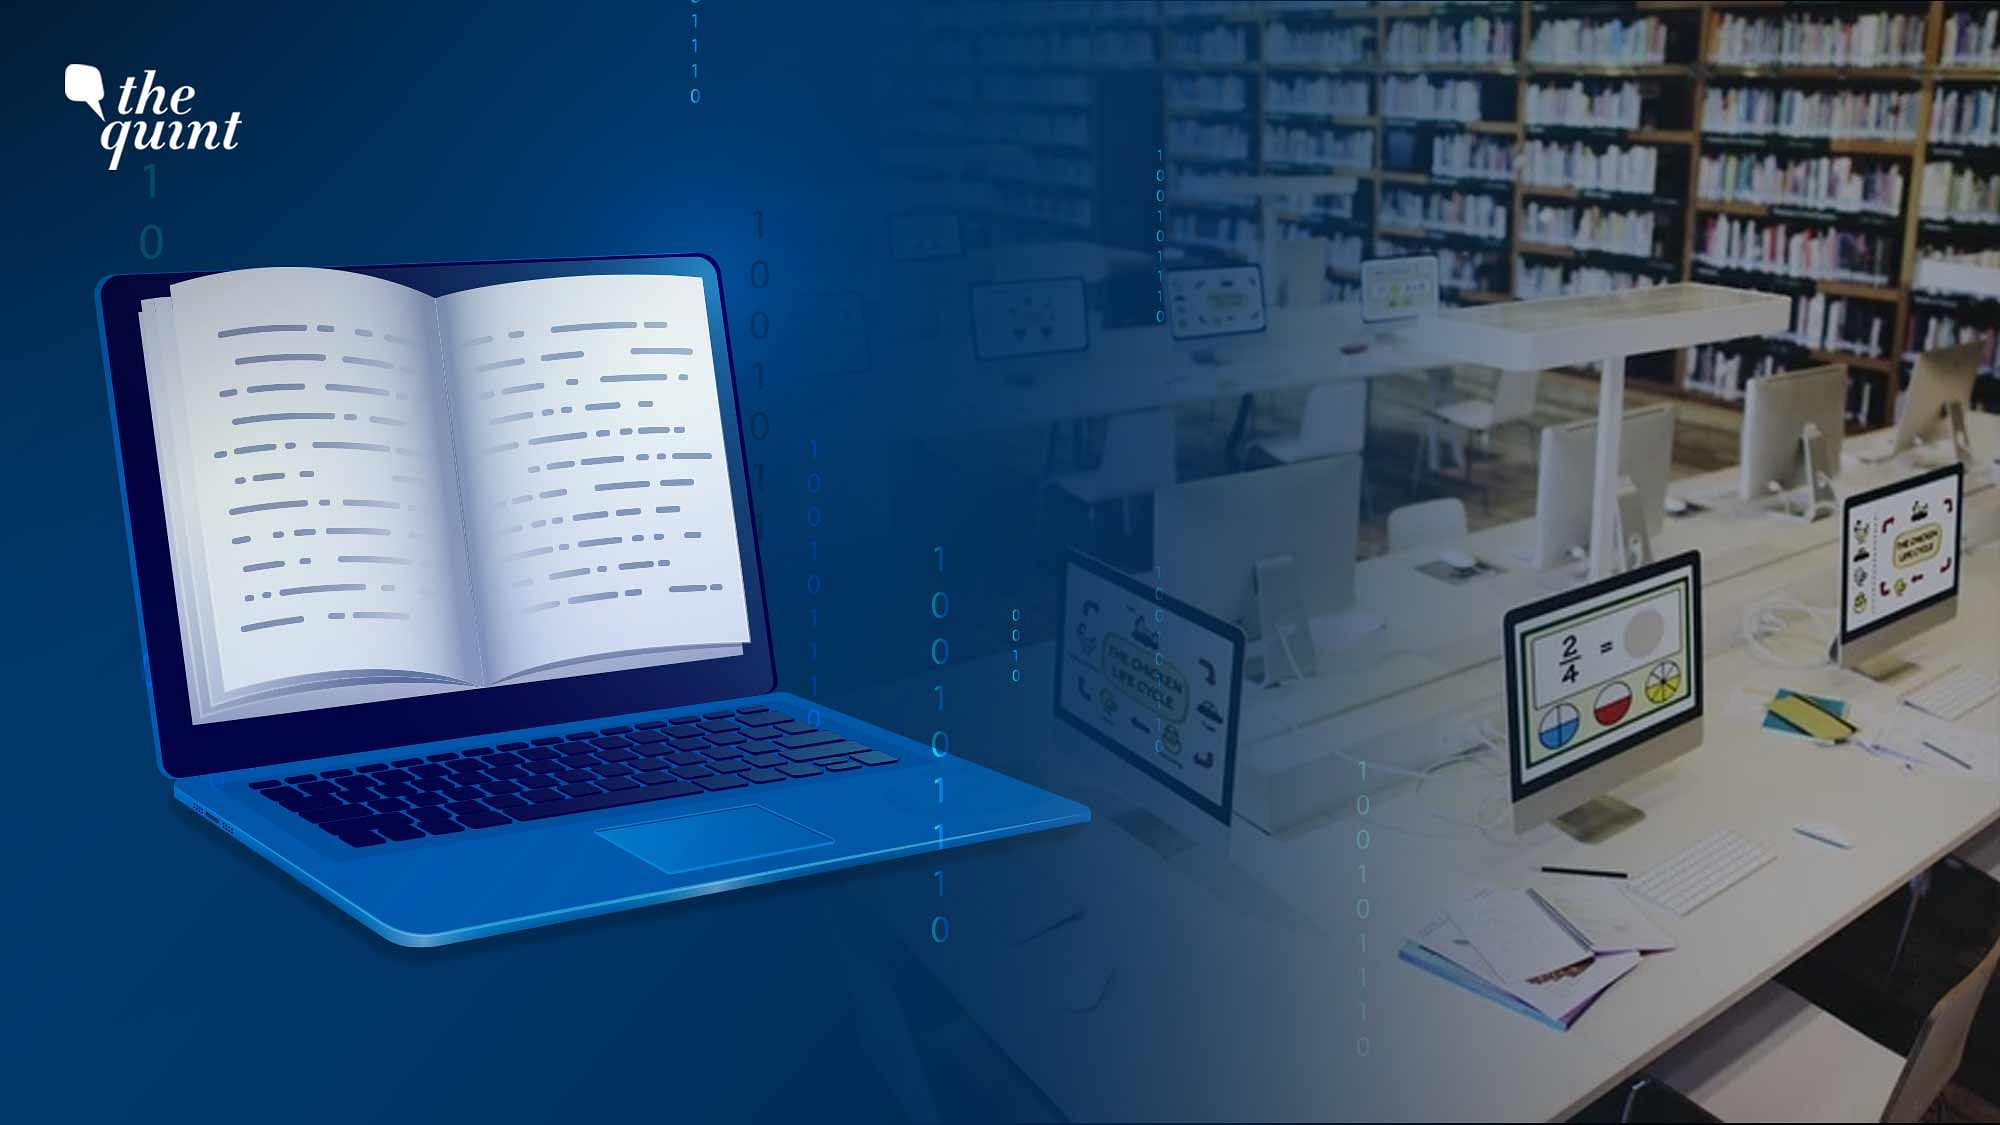 <div class="paragraphs"><p>The convergence of the old and new in libraries of the future represents an exciting frontier. While e-books and digital collections have gained prominence, physical books and manuscripts continue to hold a special place in libraries.</p></div>